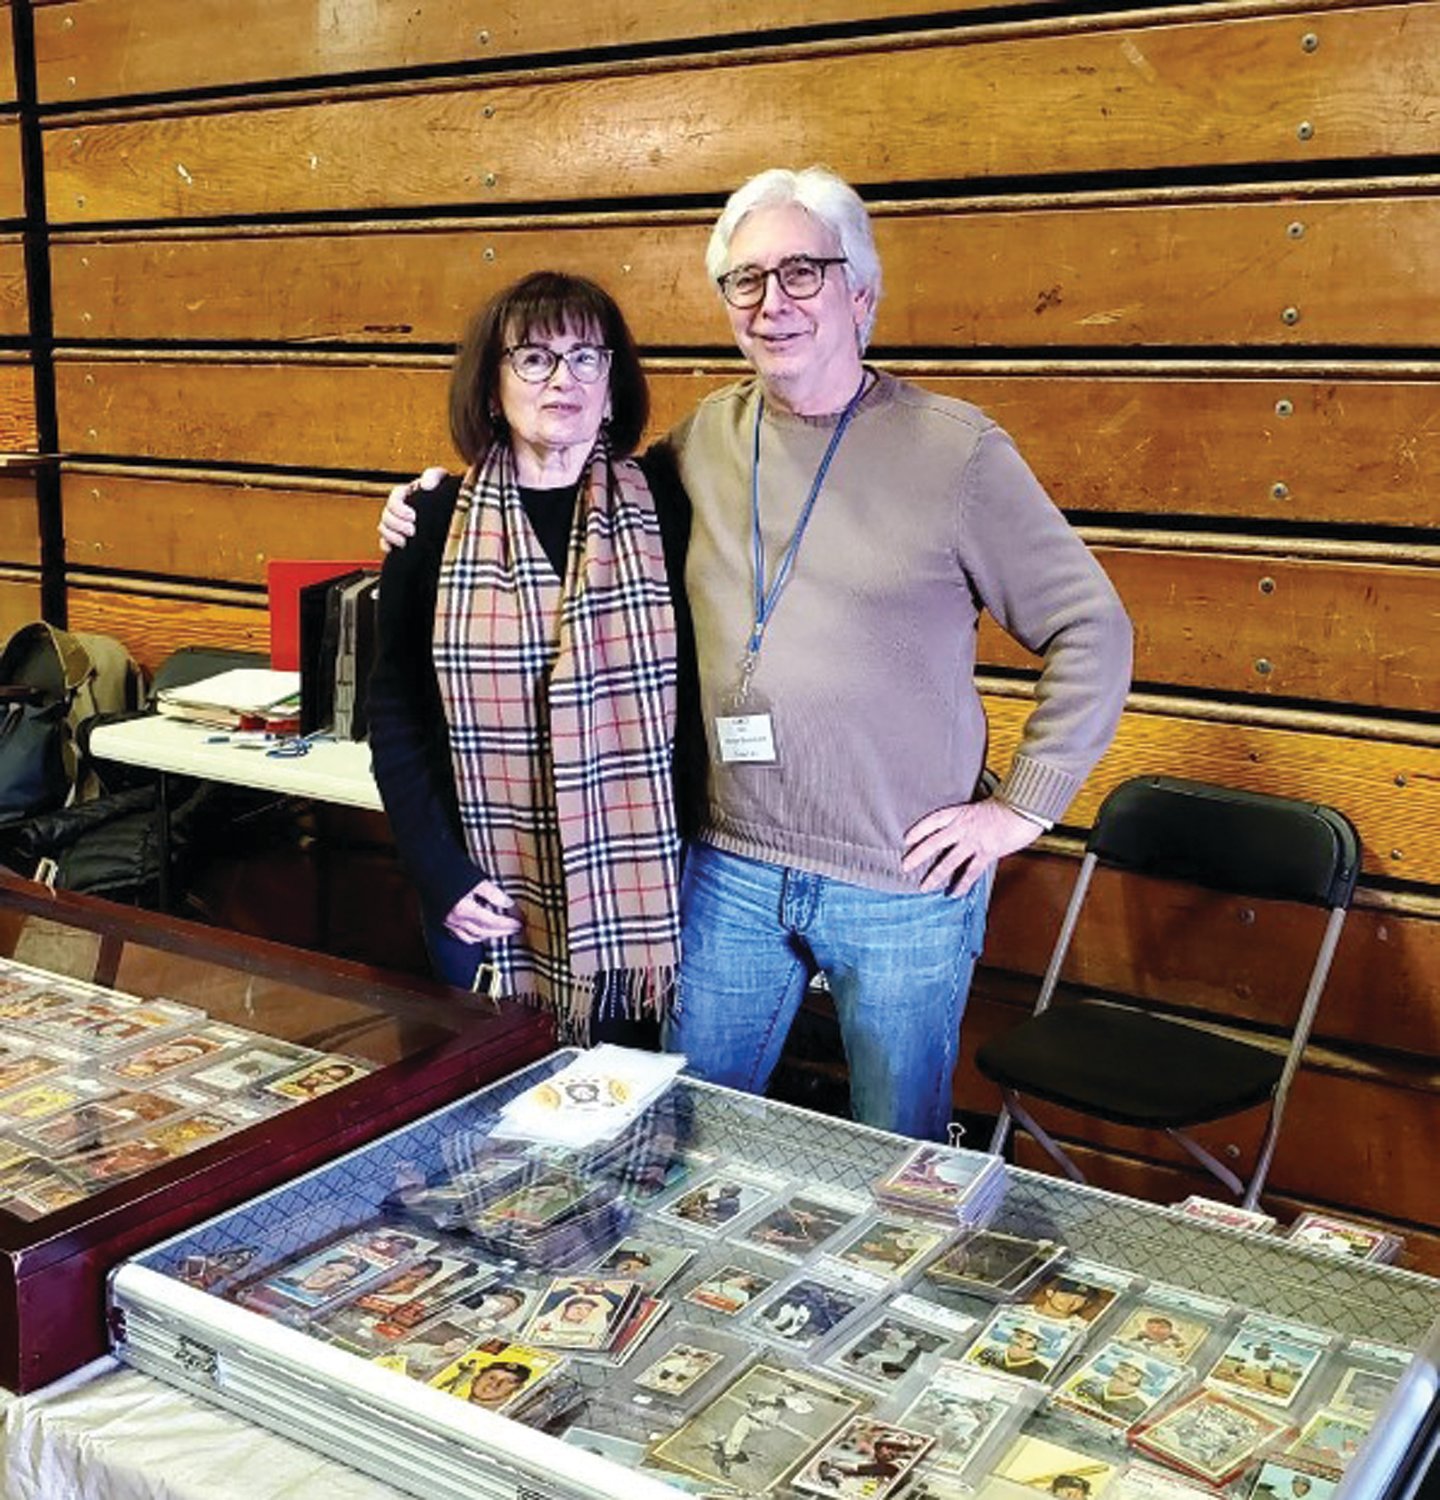 LOCAL LINK: Cranston resident Myron Bernstein and his wife Arlene were among the many dealers at last weekend’s record-setting Cranston Card and Collector’s Show.